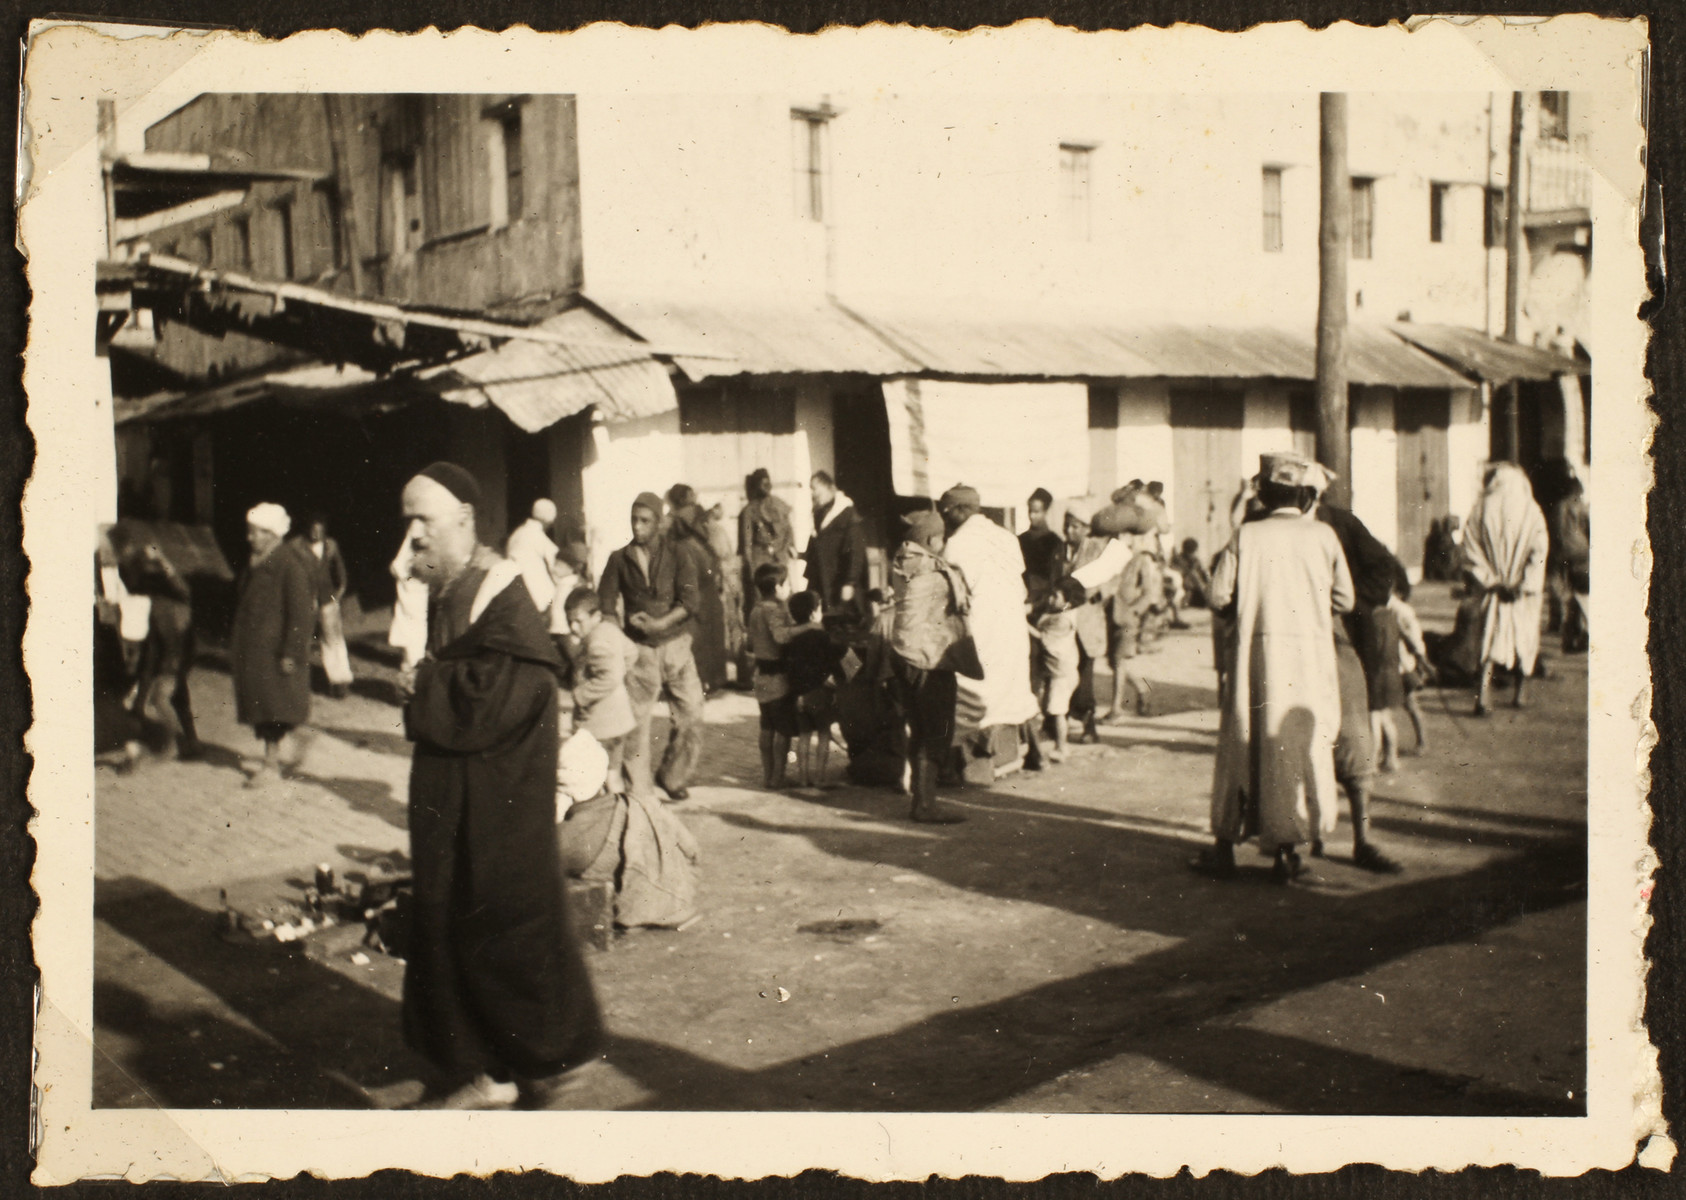 Arabs and refugees walk down a street in Casablanca.